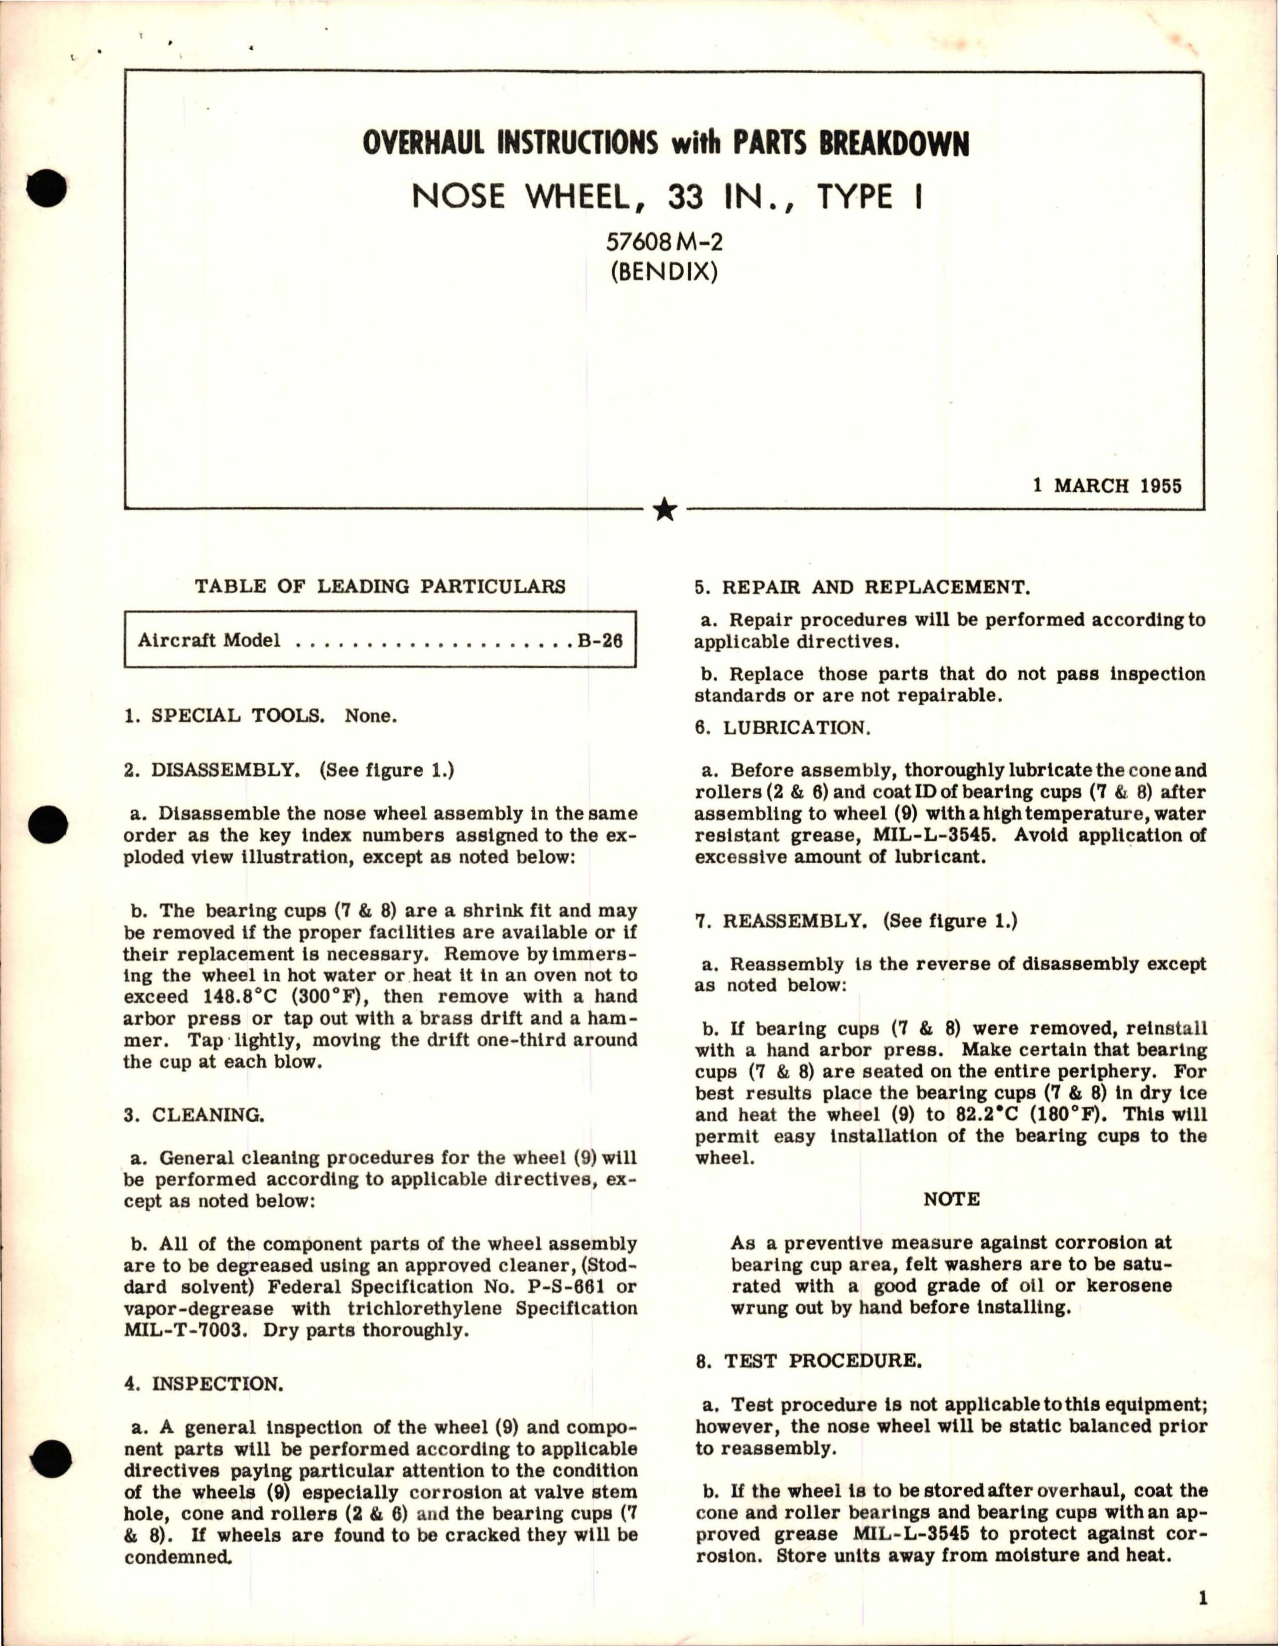 Sample page 1 from AirCorps Library document: Overhaul Instructions with Parts Breakdown for 33 inch Nose Wheel - Type 1 - 57608M-2